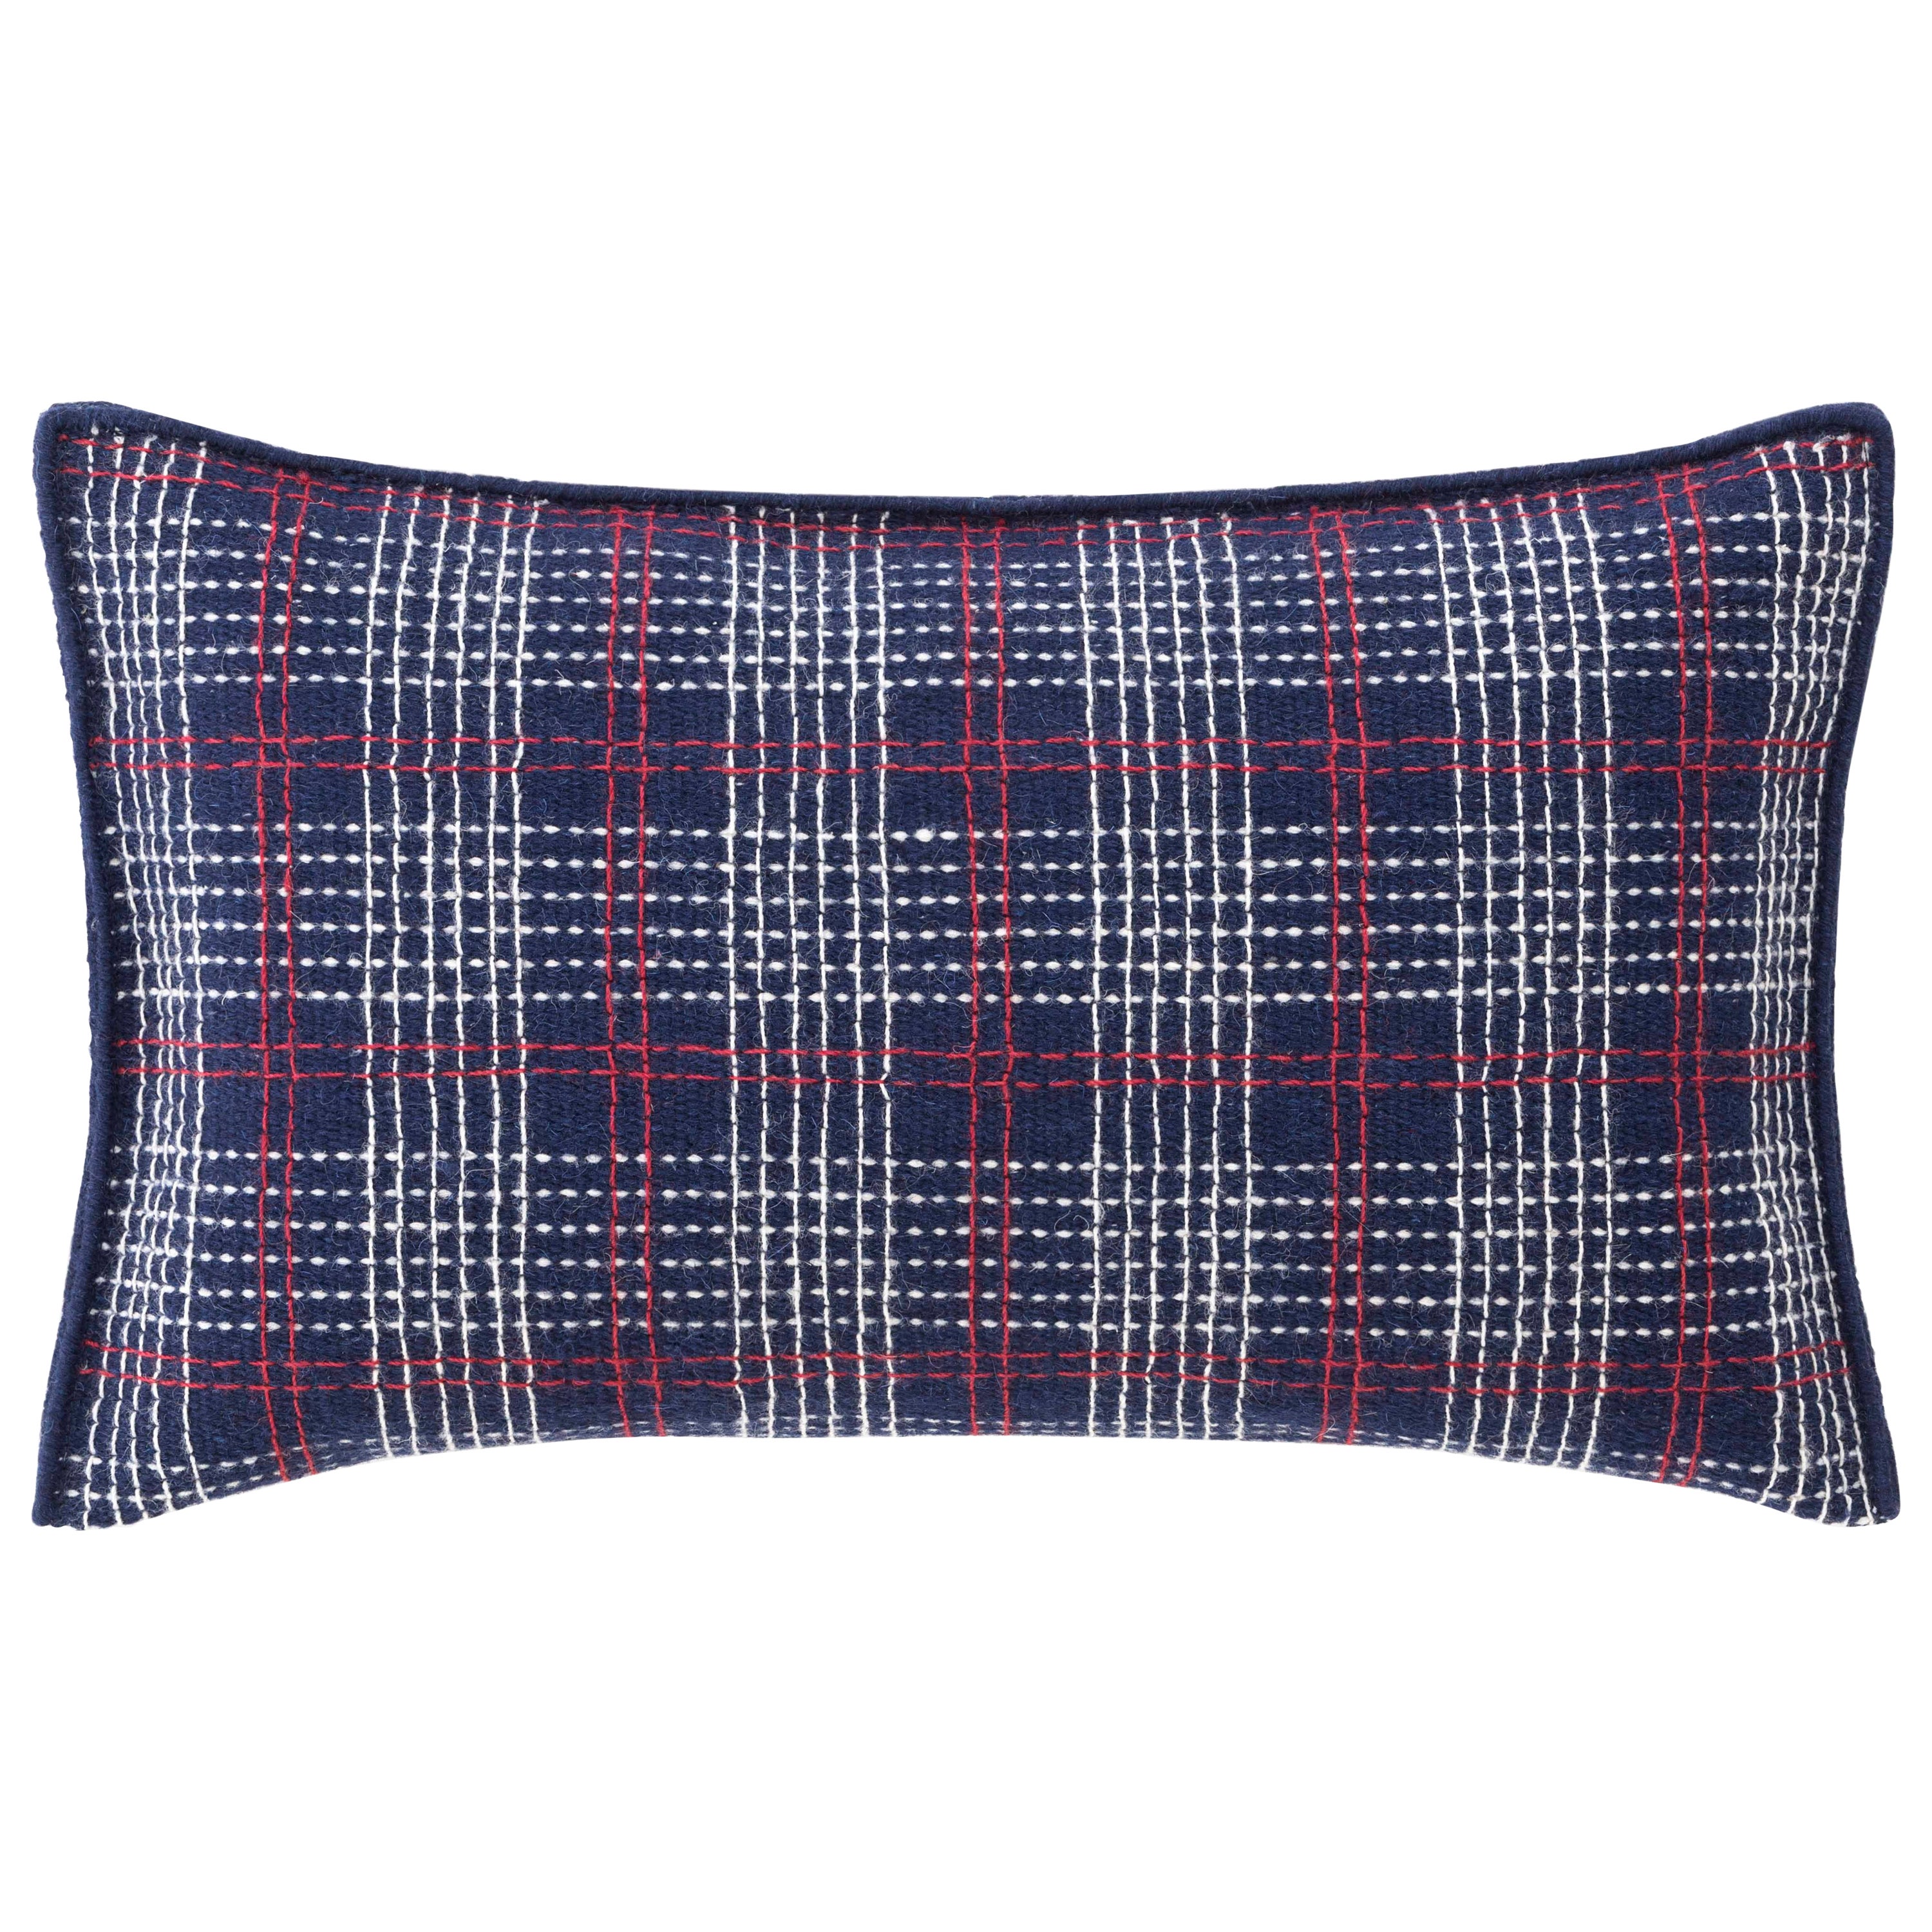 GAN Spaces Lan Small Cushion with Wool in Indigo by Neri&Hu For Sale